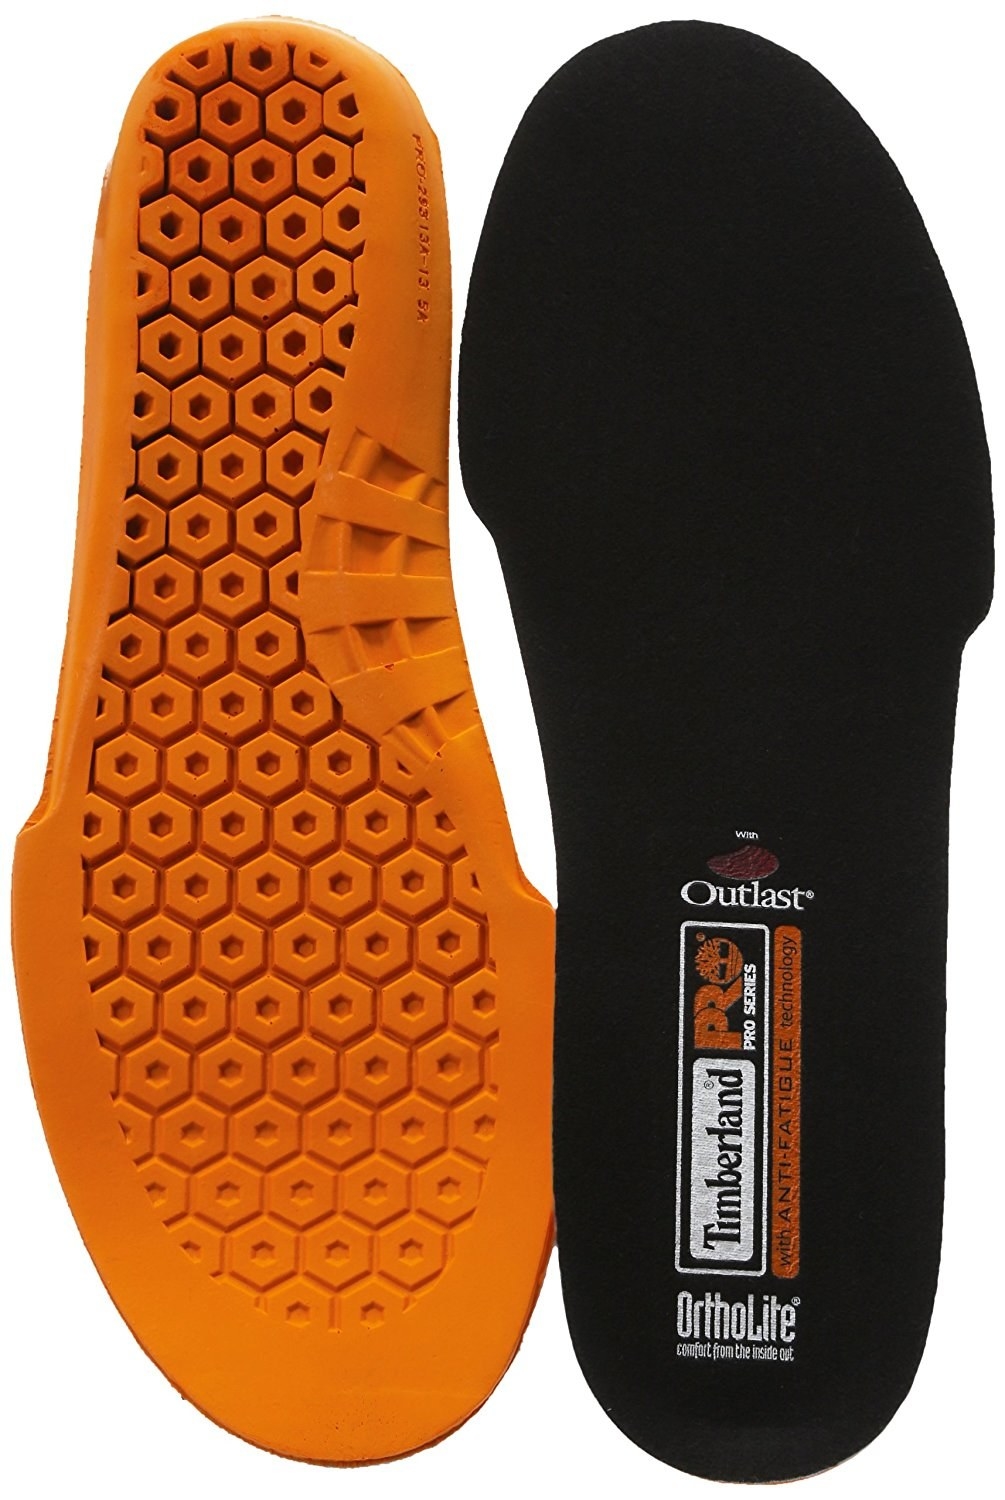 best insoles for blundstone boots